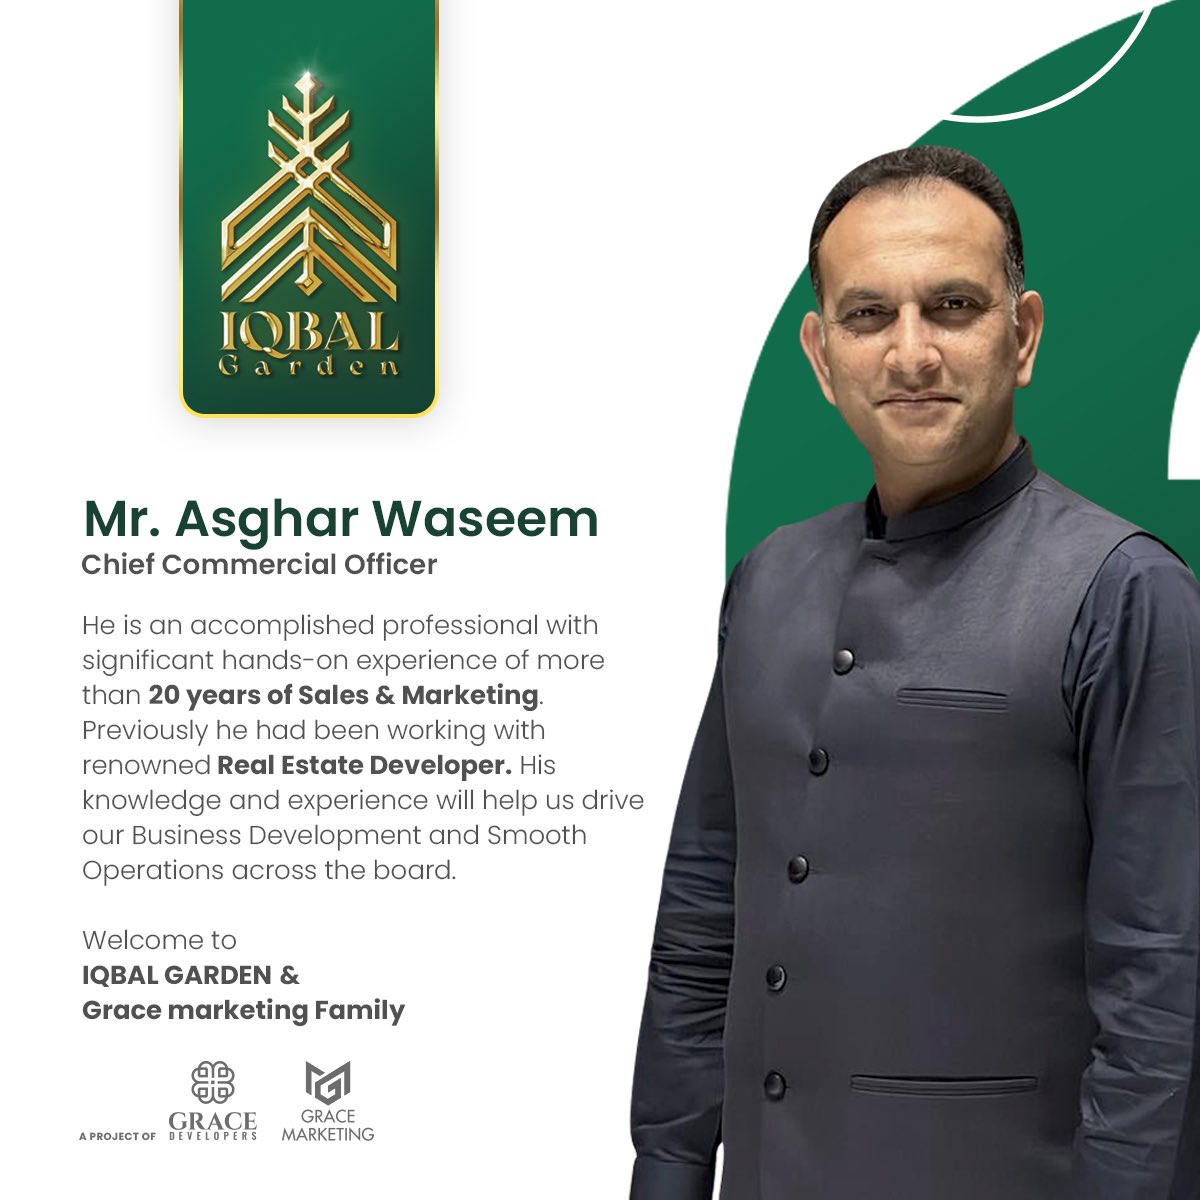 We are pleased to announce the joining of Asghar Waseem as Chief Commercial Officer at IQBAL GARDEN. 

#IQBALGARDEN #iqbalgardencorporateoffice #gracemarketing #gracedeveloper #primelocation #kalashahkaku #CCO #welcome #chiefcommercialofficer